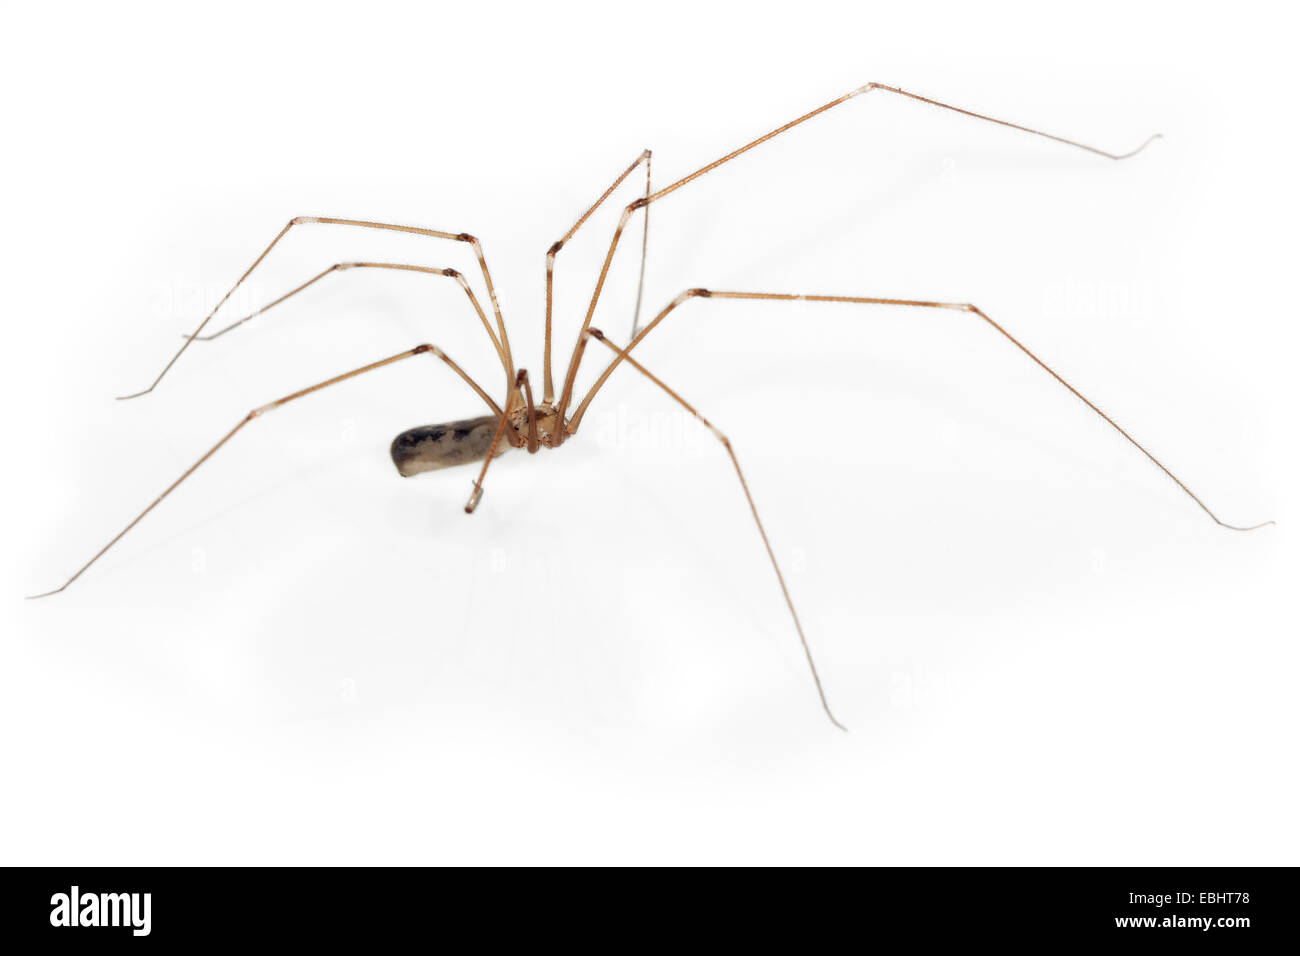 Female Cellar spider (Pholcus phalangioides), on a white background, part of the famile Pholcidae, Cellar or Daddylongleg spiders. Stock Photo